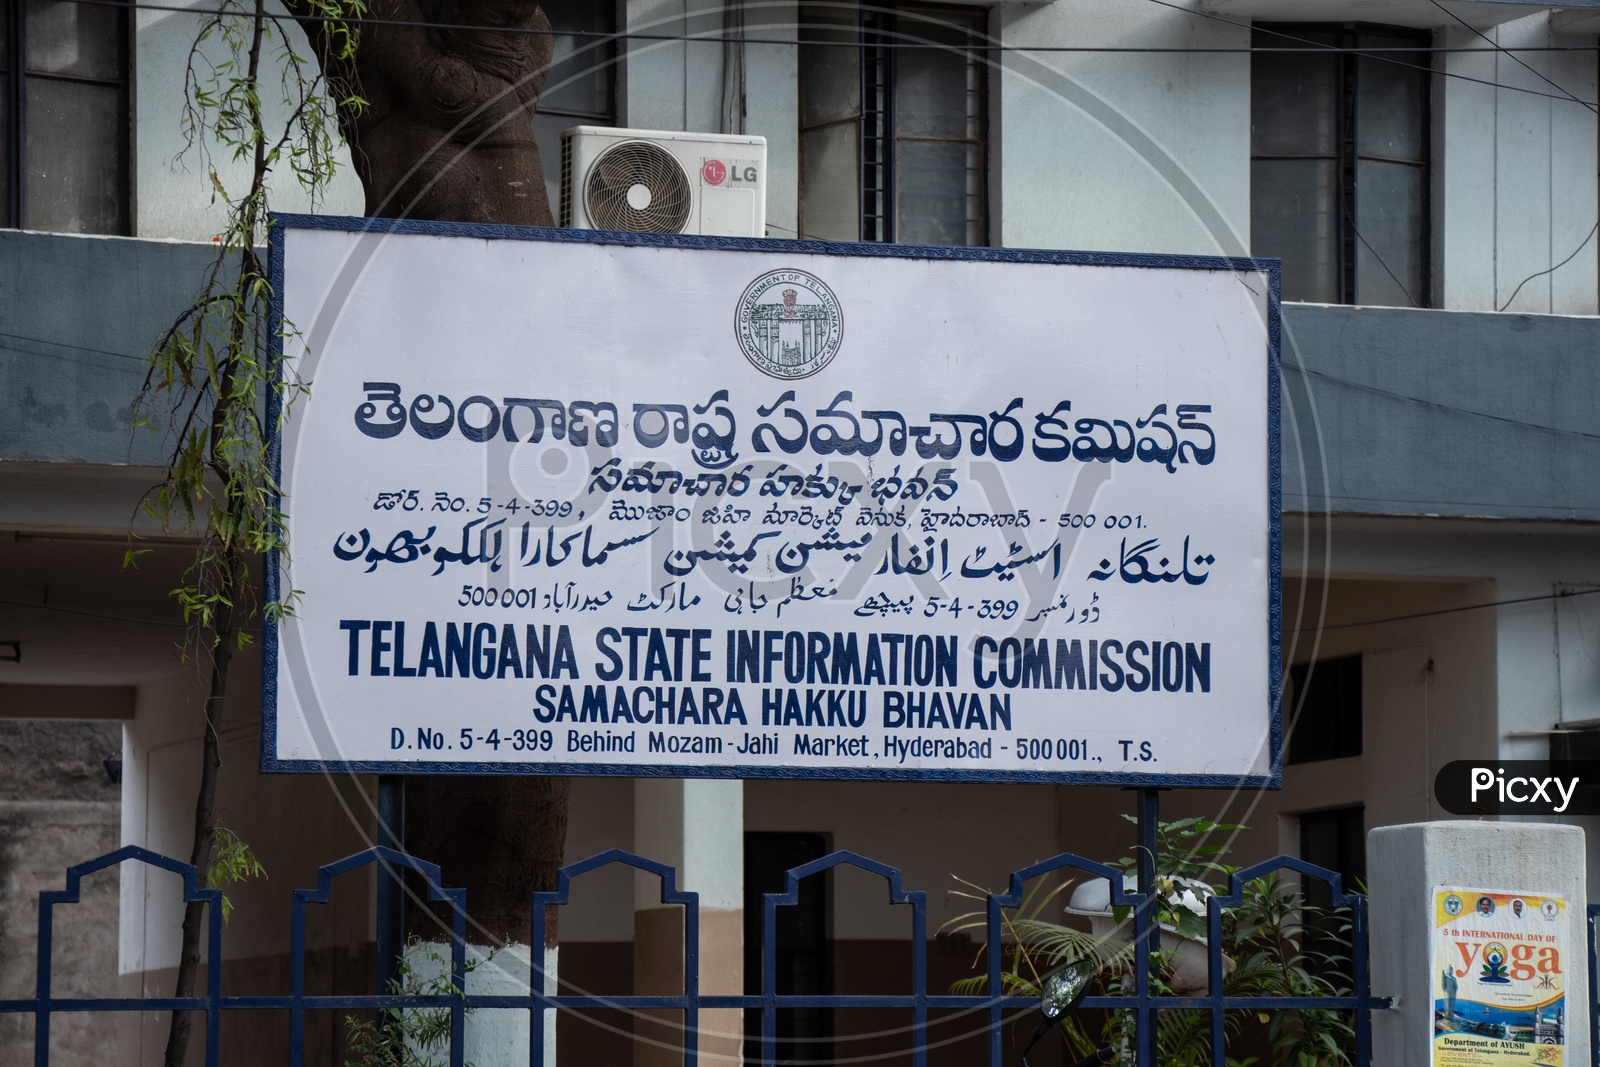 Telangana State  Information Commission  Name Board